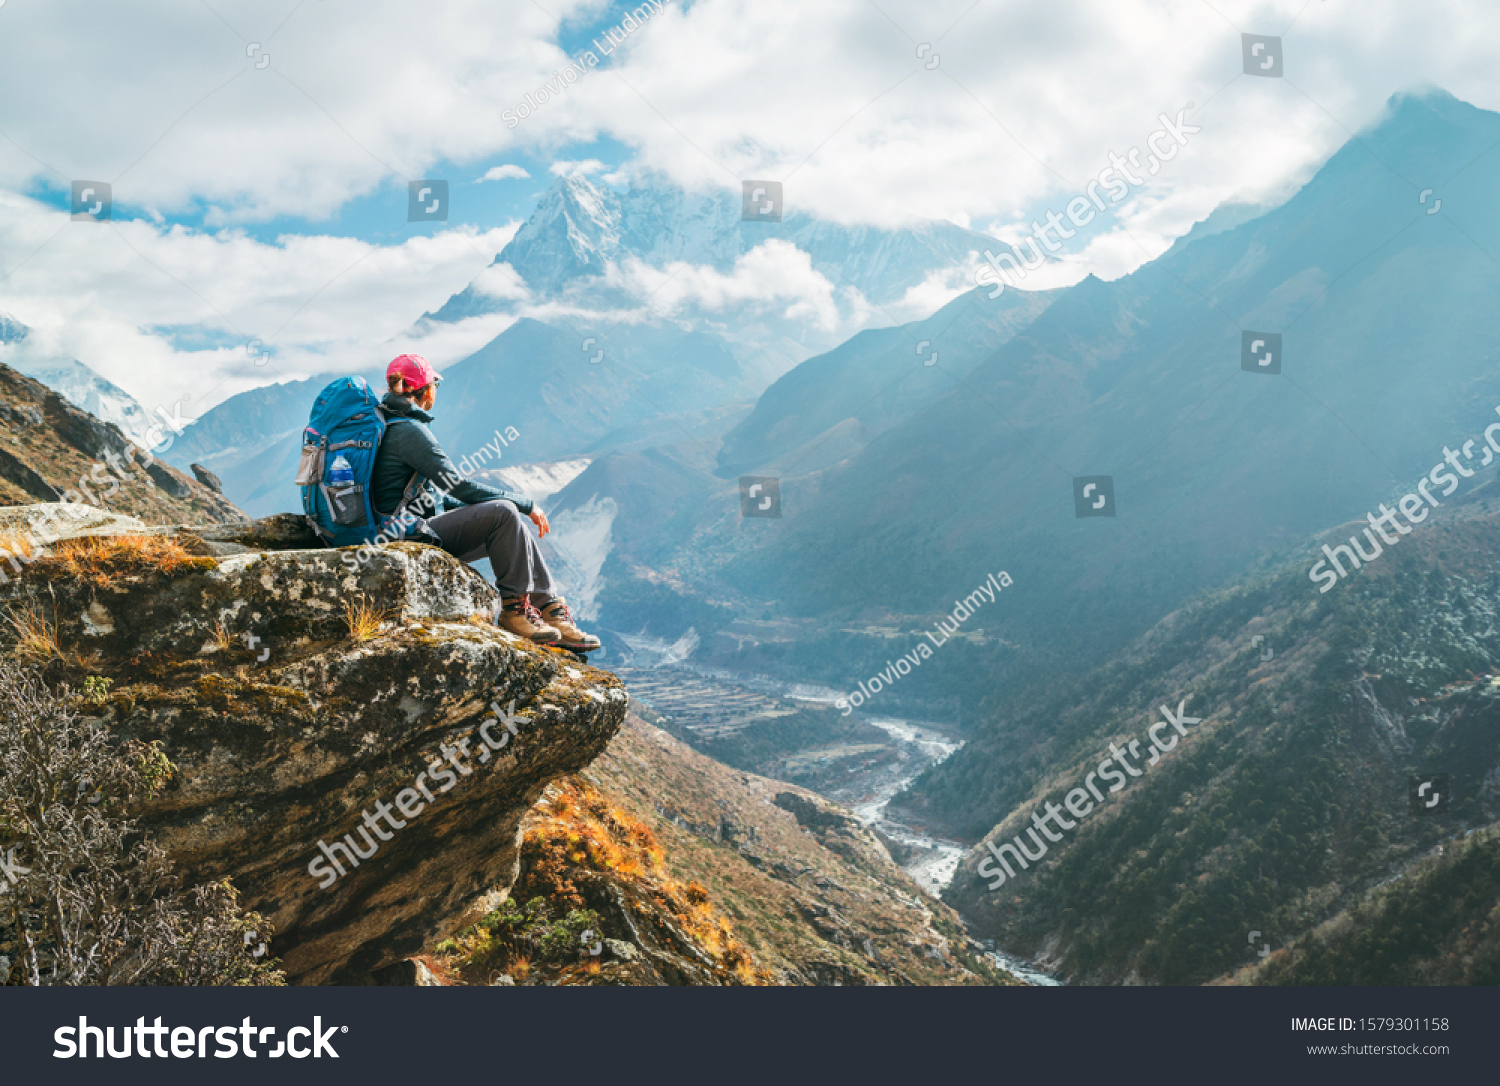 Young hiker backpacker female sitting on the cliff edge and enjoying Ama Dablam 6,812m peak view during Everest Base Camp (EBC) trekking route near Phortse, Nepal. Active vacations concept image #1579301158